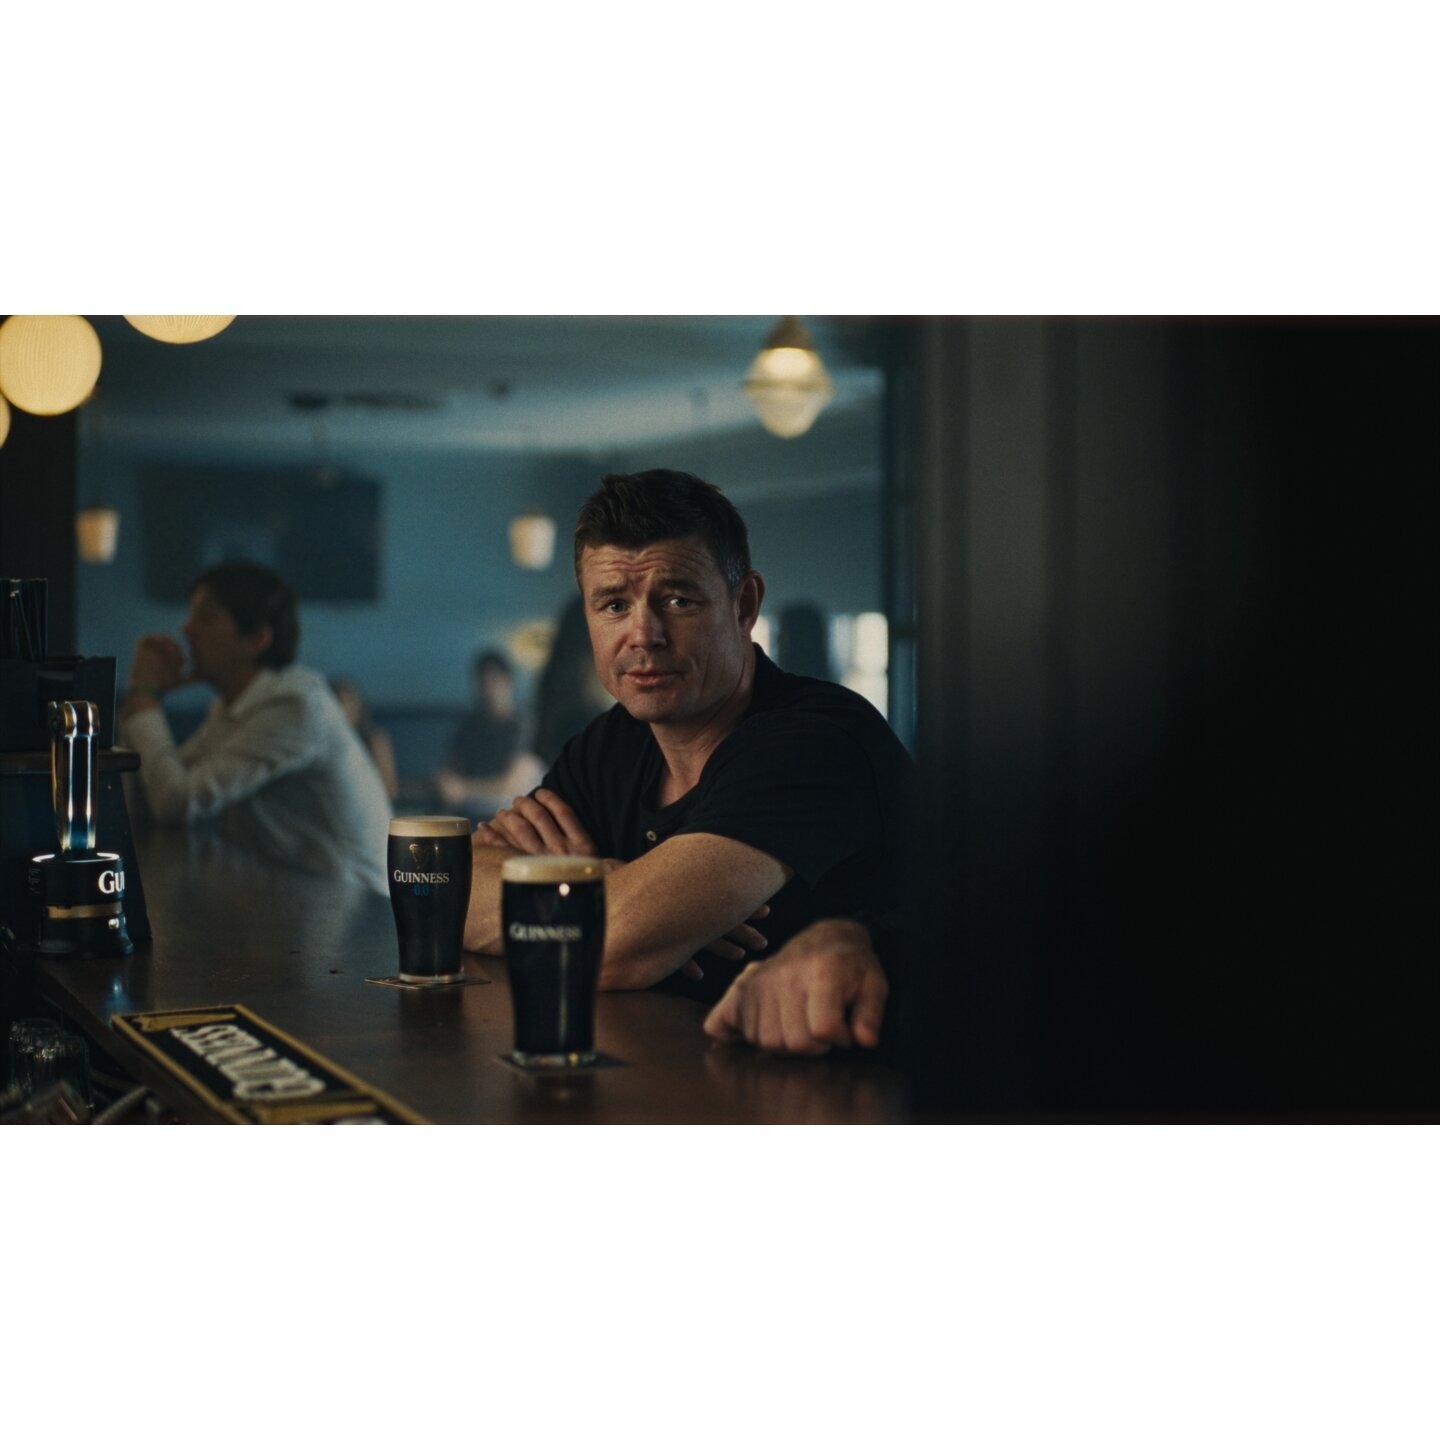 Guinness - Don't Jinx It

Had to share this one in celebration of the Rugby kicking off tomorrow! (🇮🇪 for the Grand Slam)

I am a happy Irishman grading two legends of Irish rugby for Guinness &amp; the gang at Tenthman 

Director - Ian Downes
Prod